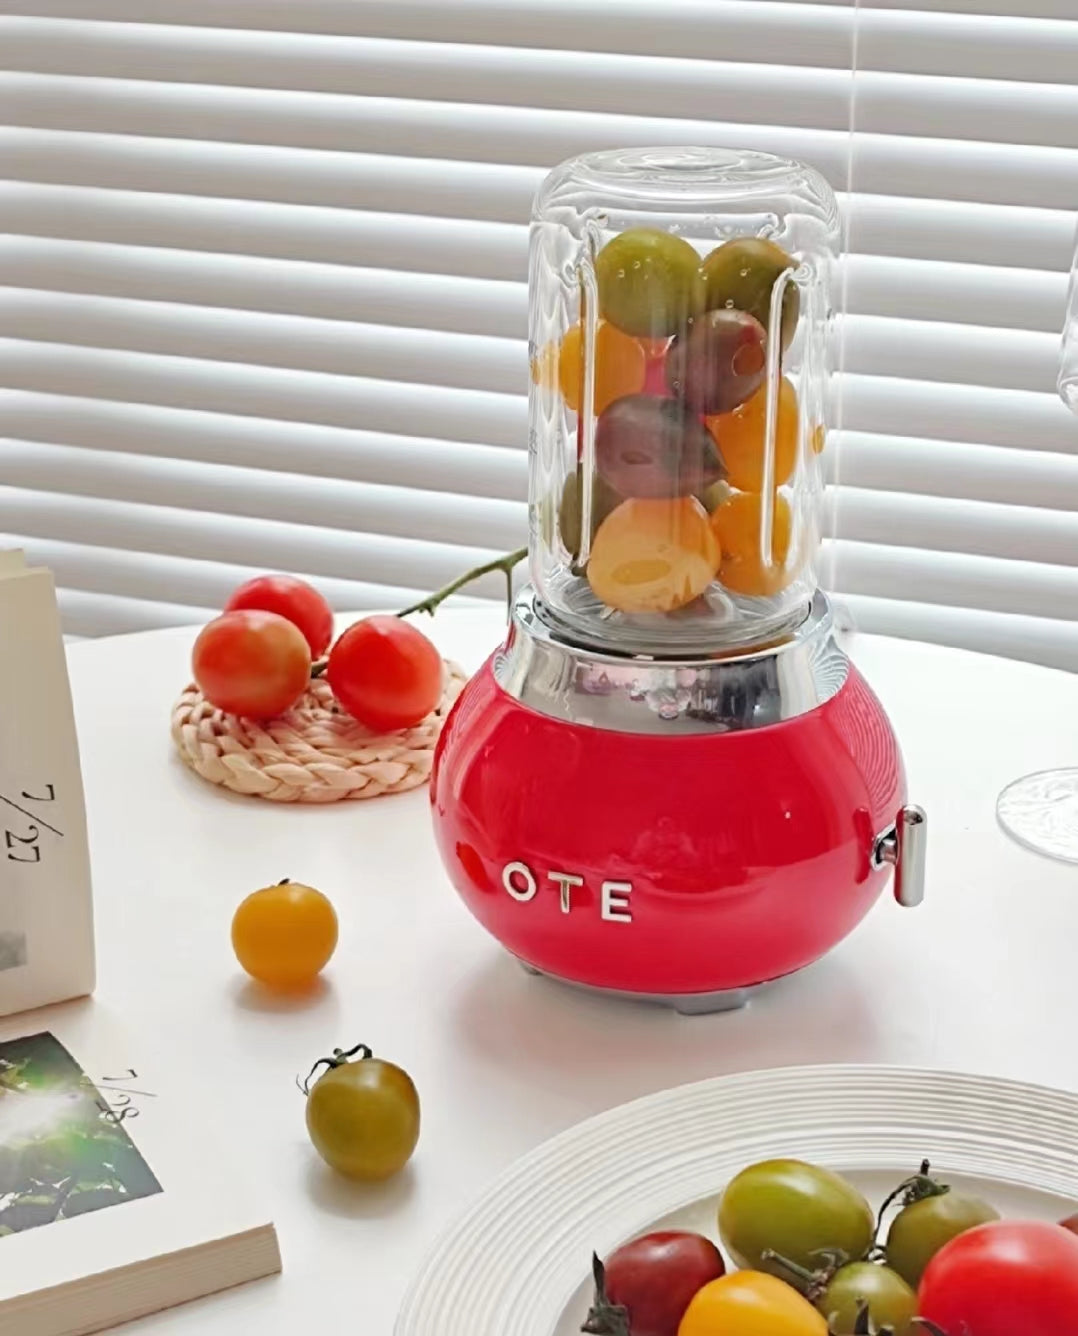 Just Mix Personal Smoothie Blender is 50% off